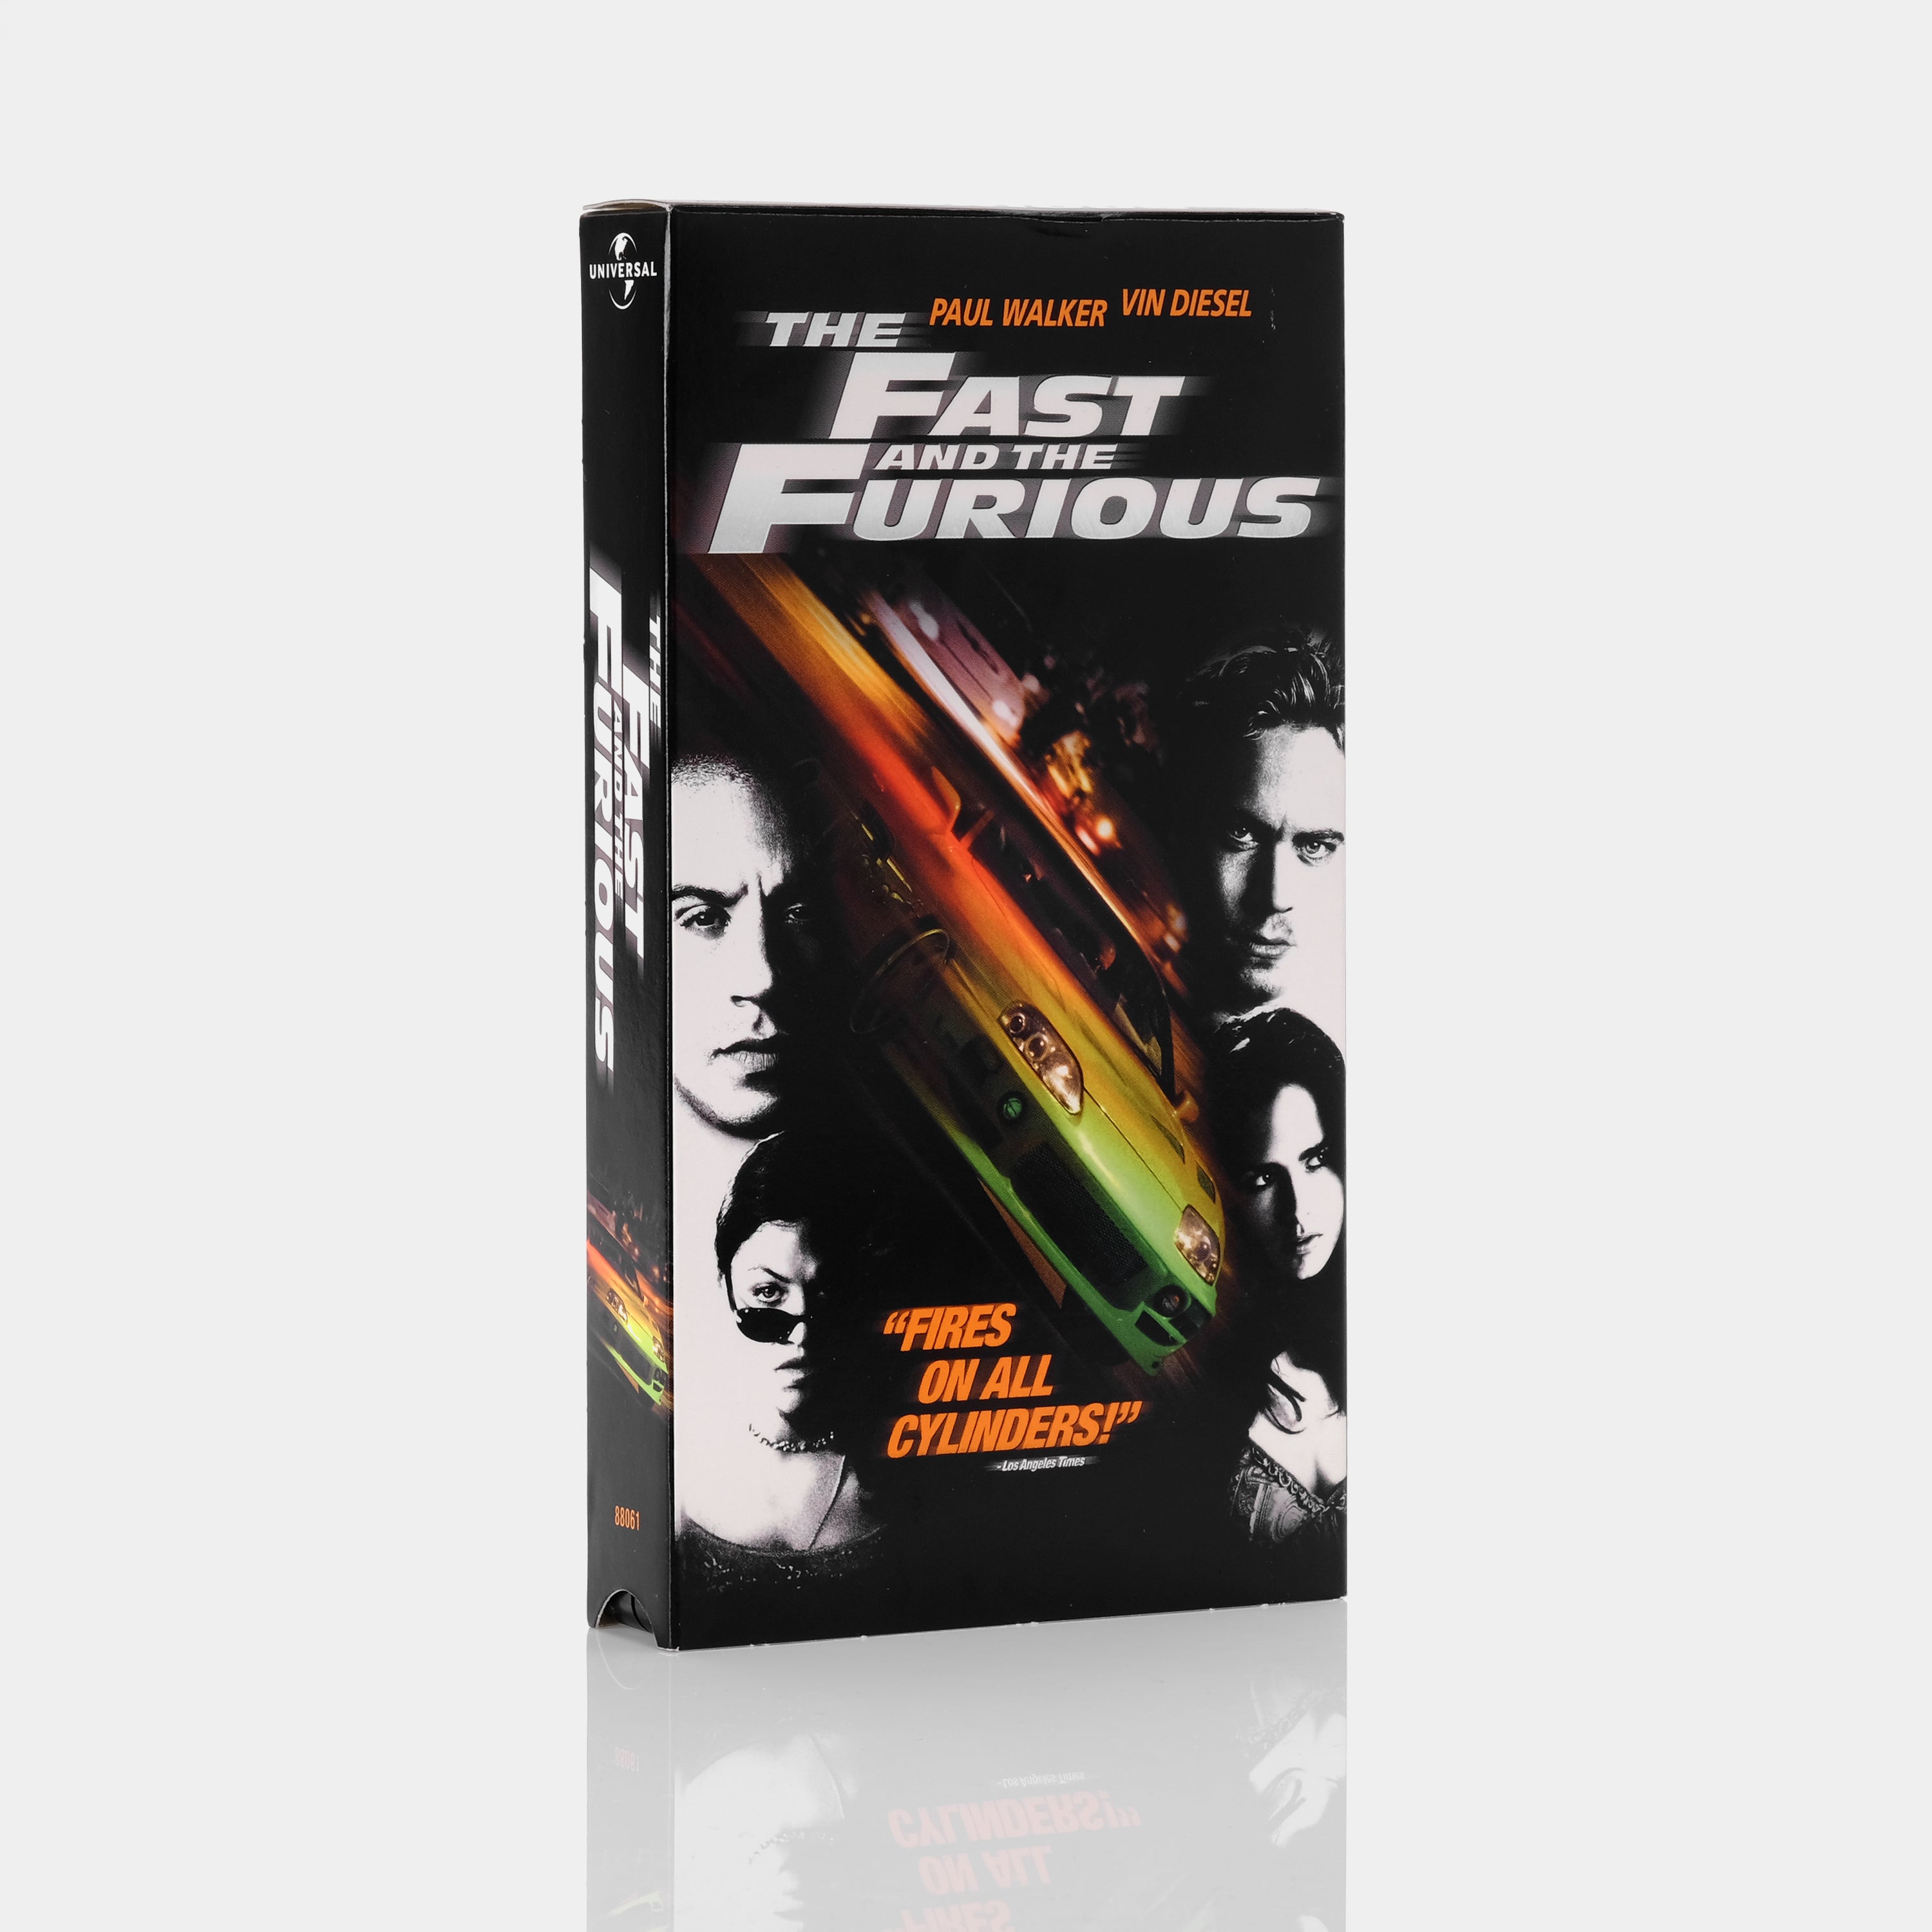 The Fast And The Furious VHS Tape